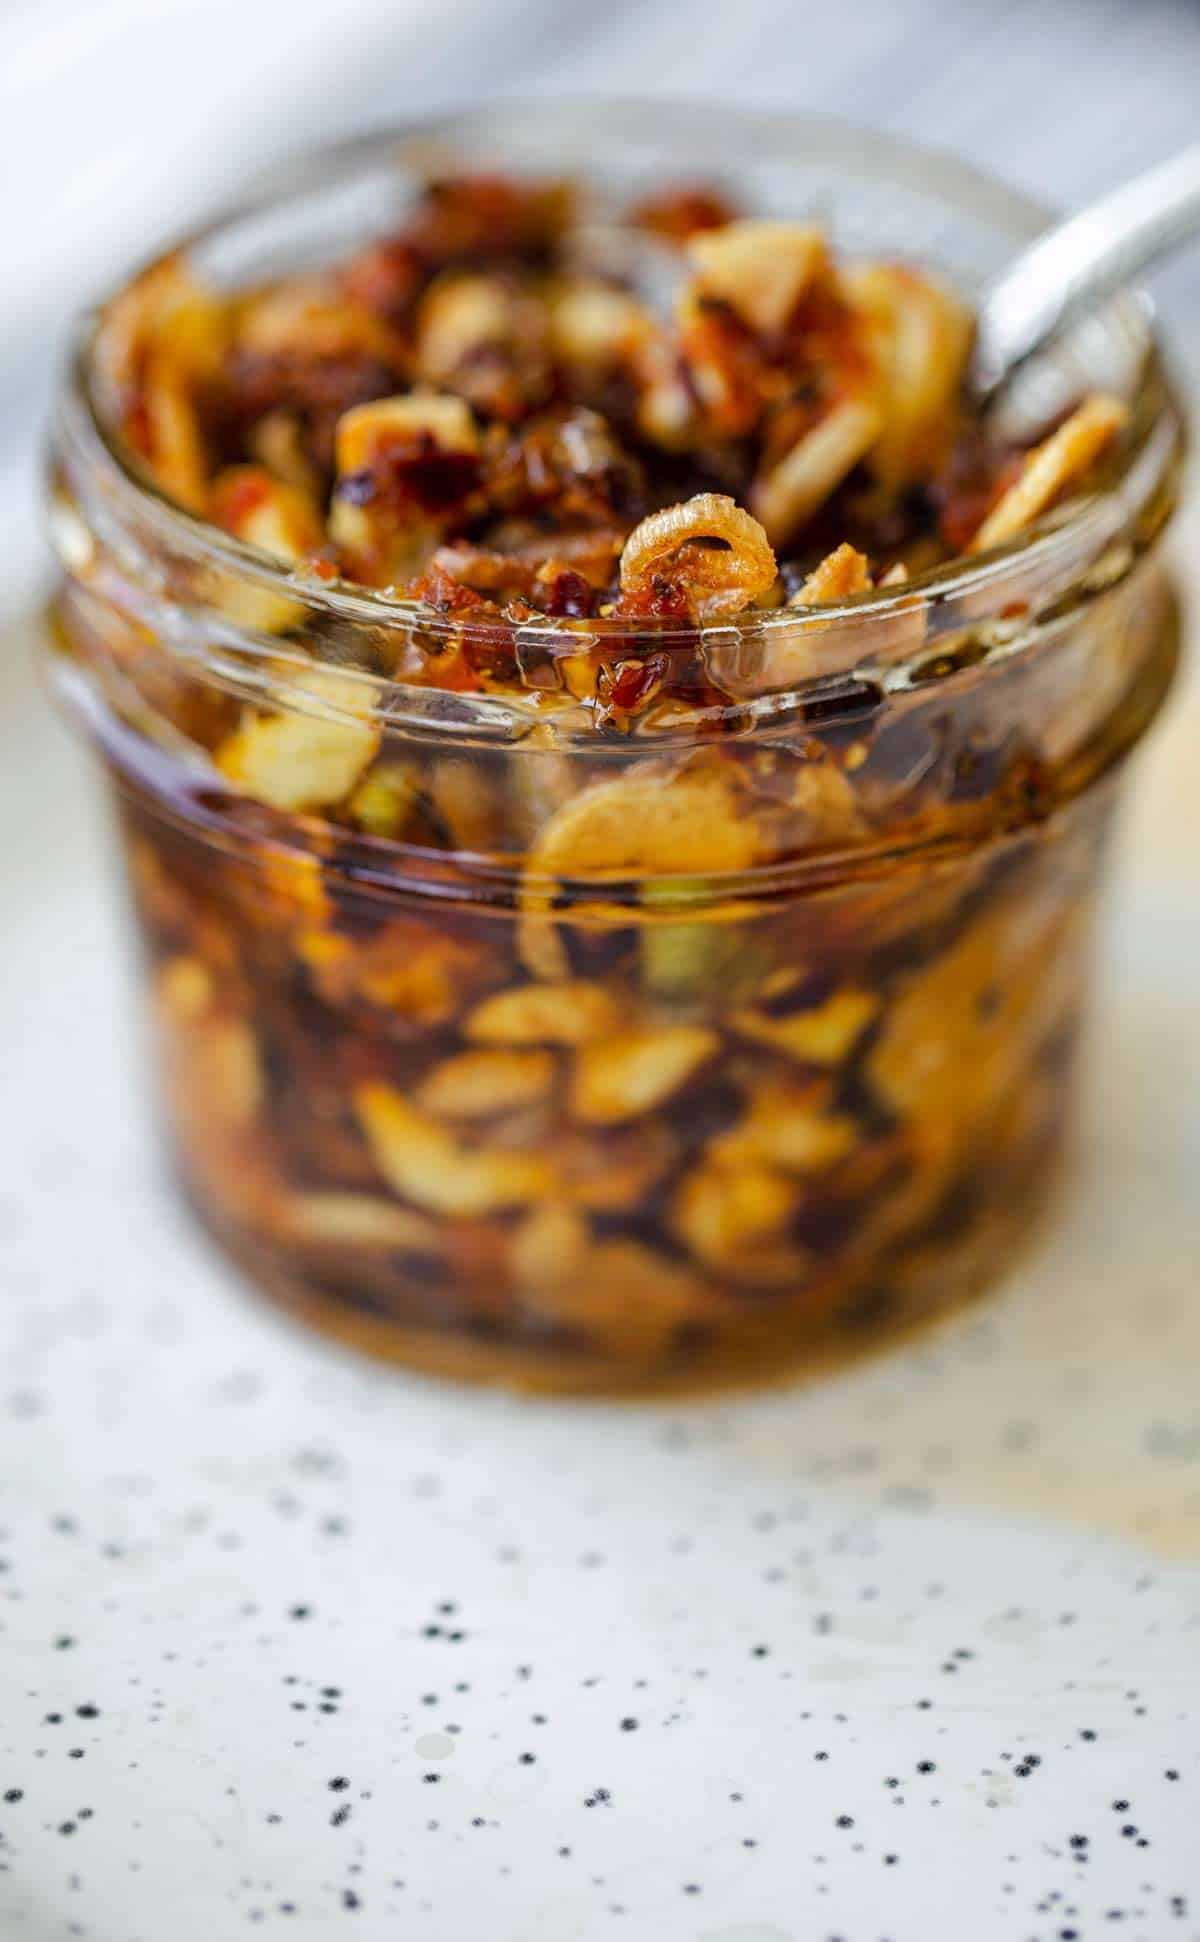 Homemade Spicy Chili Crisp is the best chili crisp recipe so you can make this flavorful, garlic crunch condiment at home. chili crisp | crispy chili oil | chili crispy recipe | chili crunch